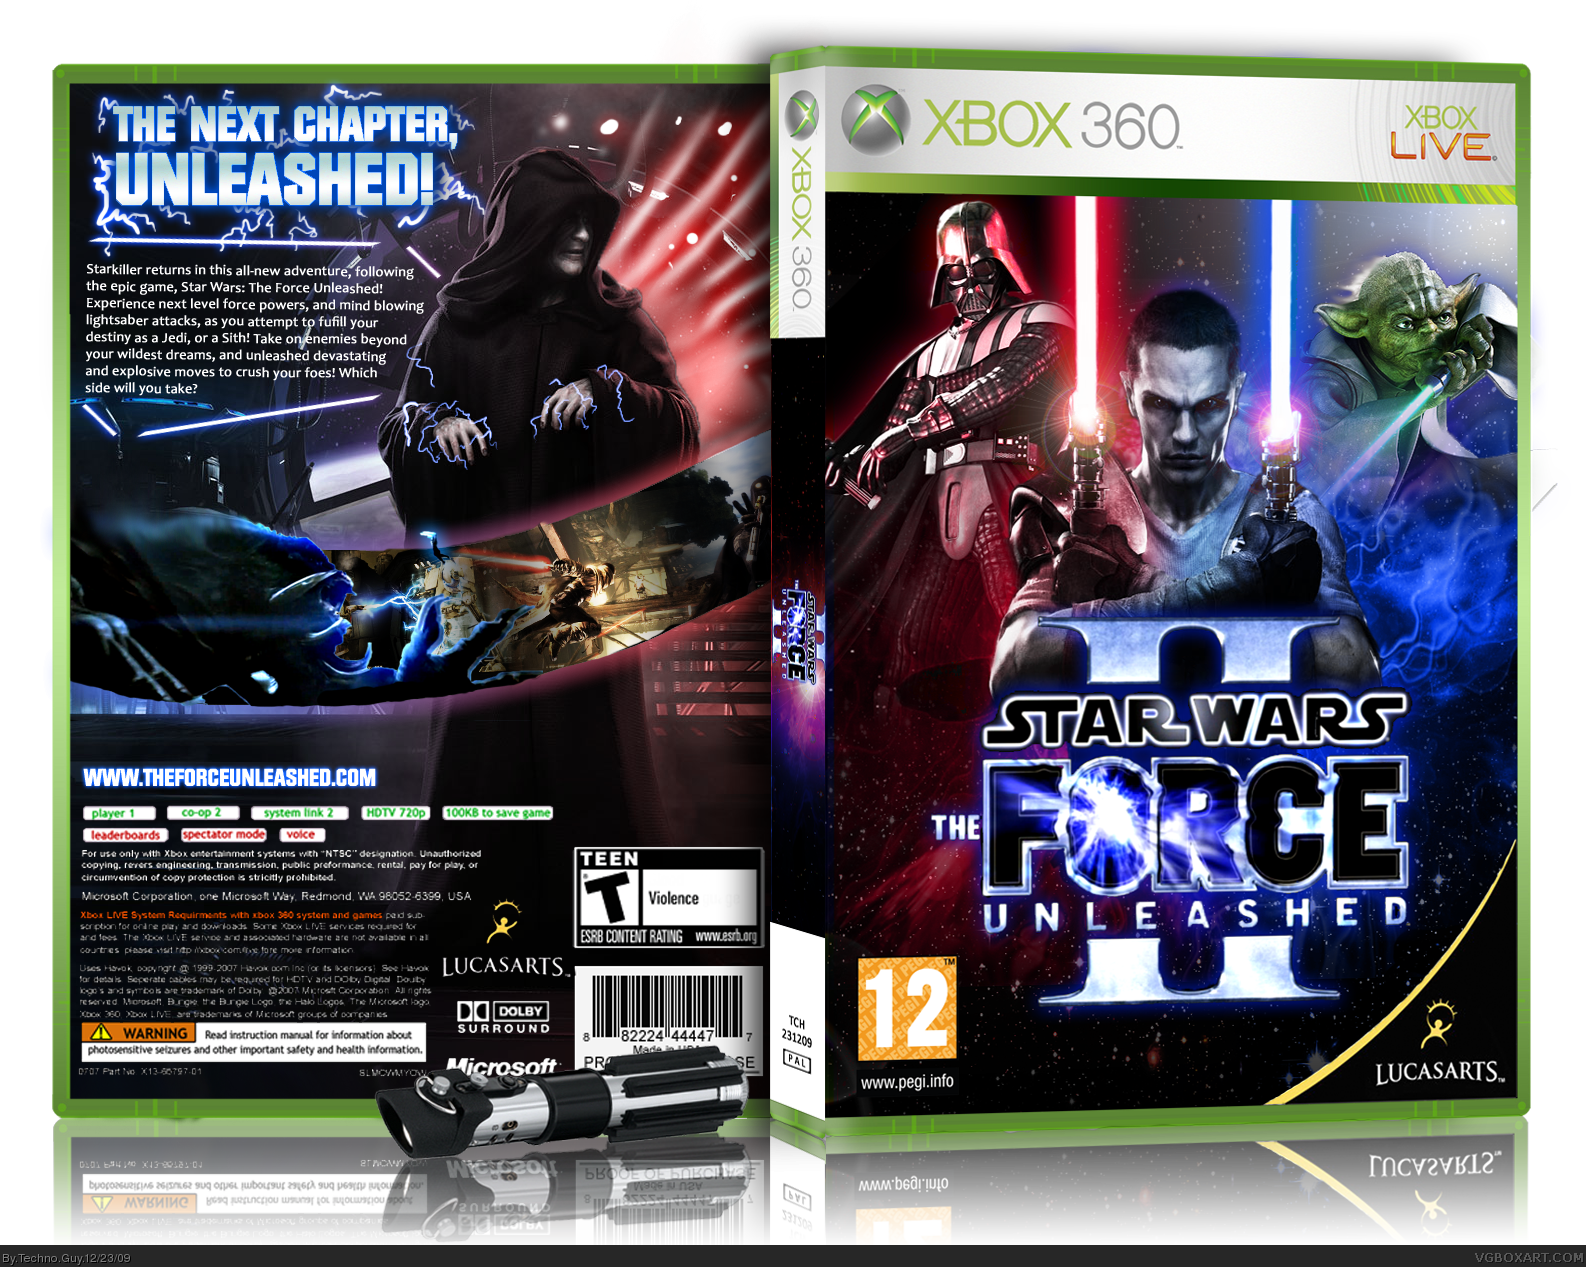 Force unleashed Xbox 360. Стар ВАРС Xbox 360. Star Wars Force unleashed PC обложка. Star Wars the Force unleashed 2 обложка PC. Коды star wars the force unleashed 2